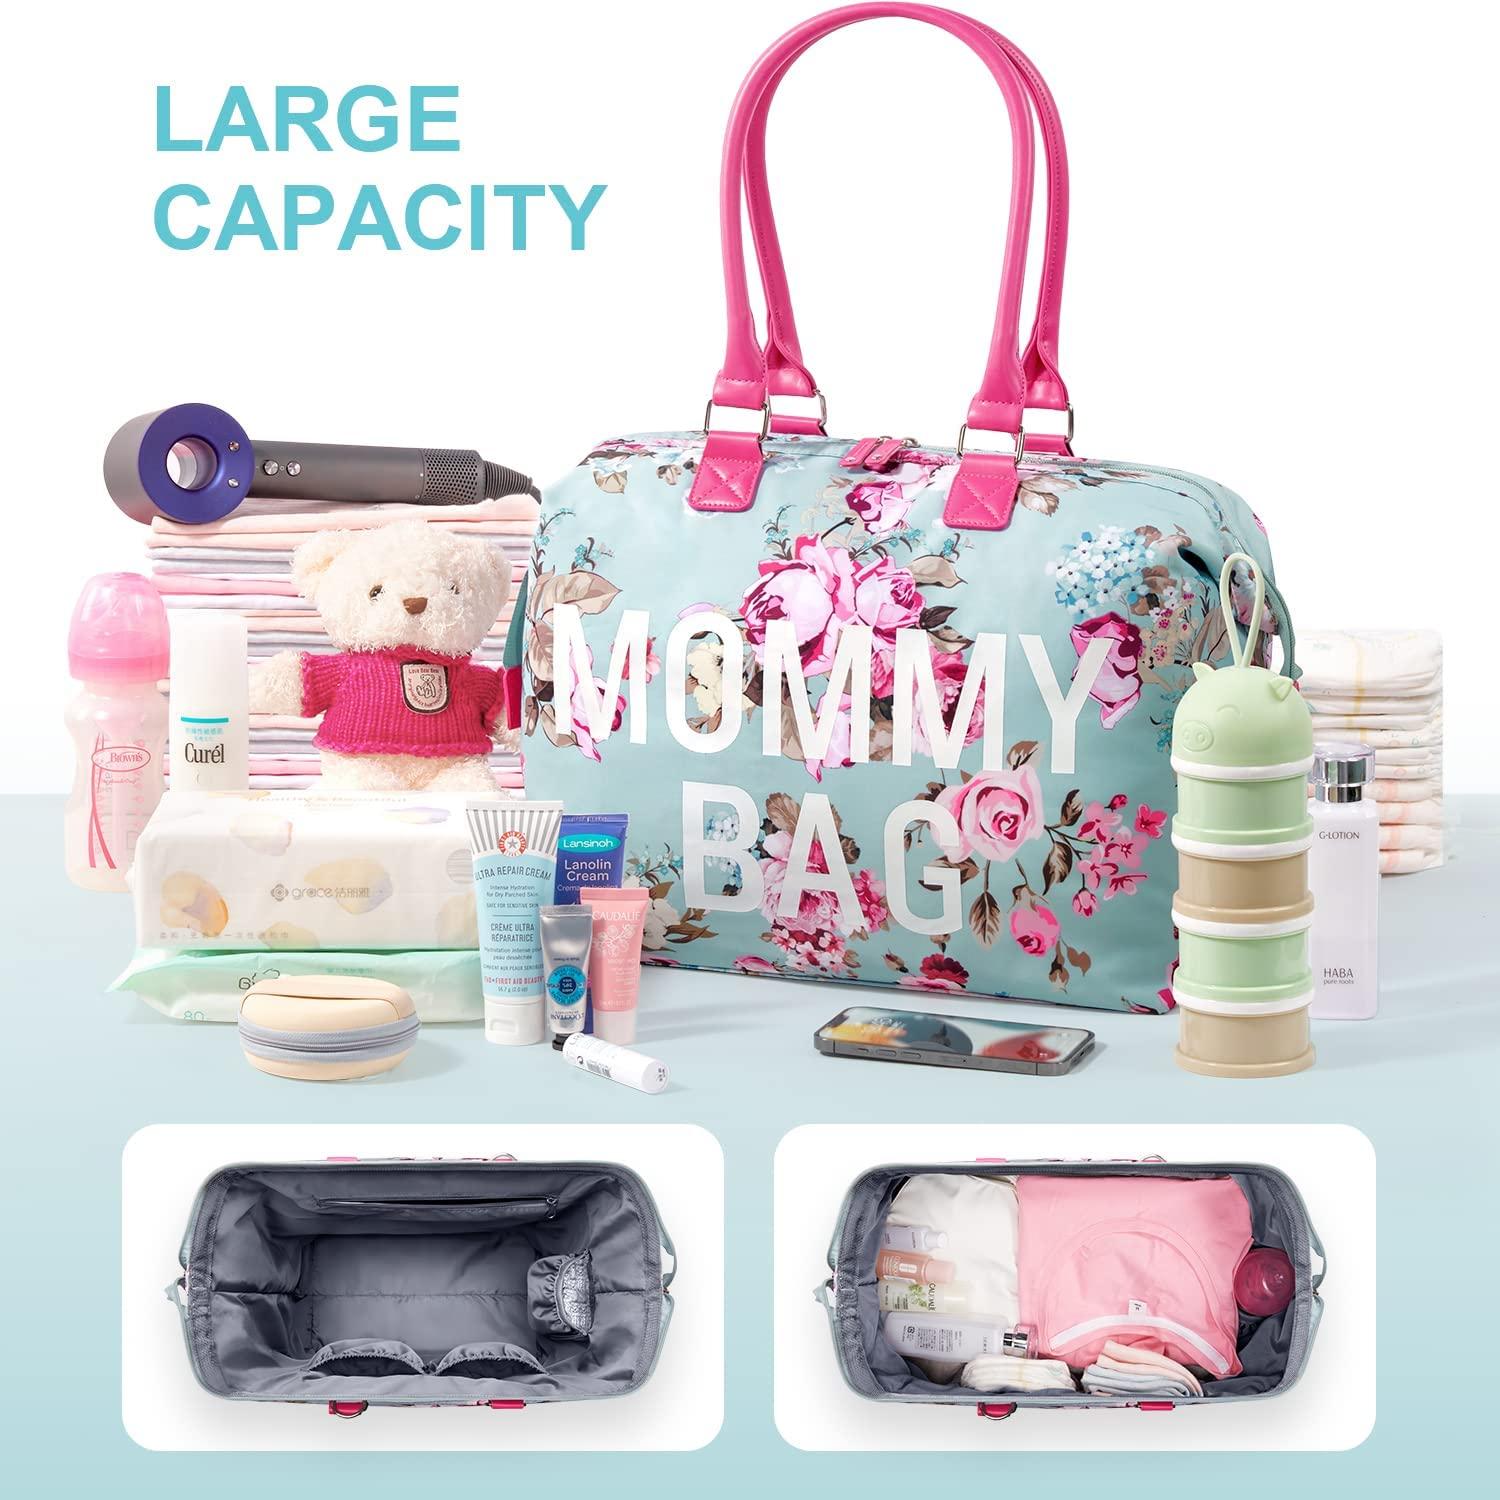 Mommy Bag for Hospital, LitBear Hospital Bag for Labor and Delivery, Large  Capacity Waterproof Mommy Bag, Multifunction Overnight Bag for Women, Mom  Bag with Straps (Blue Floral)